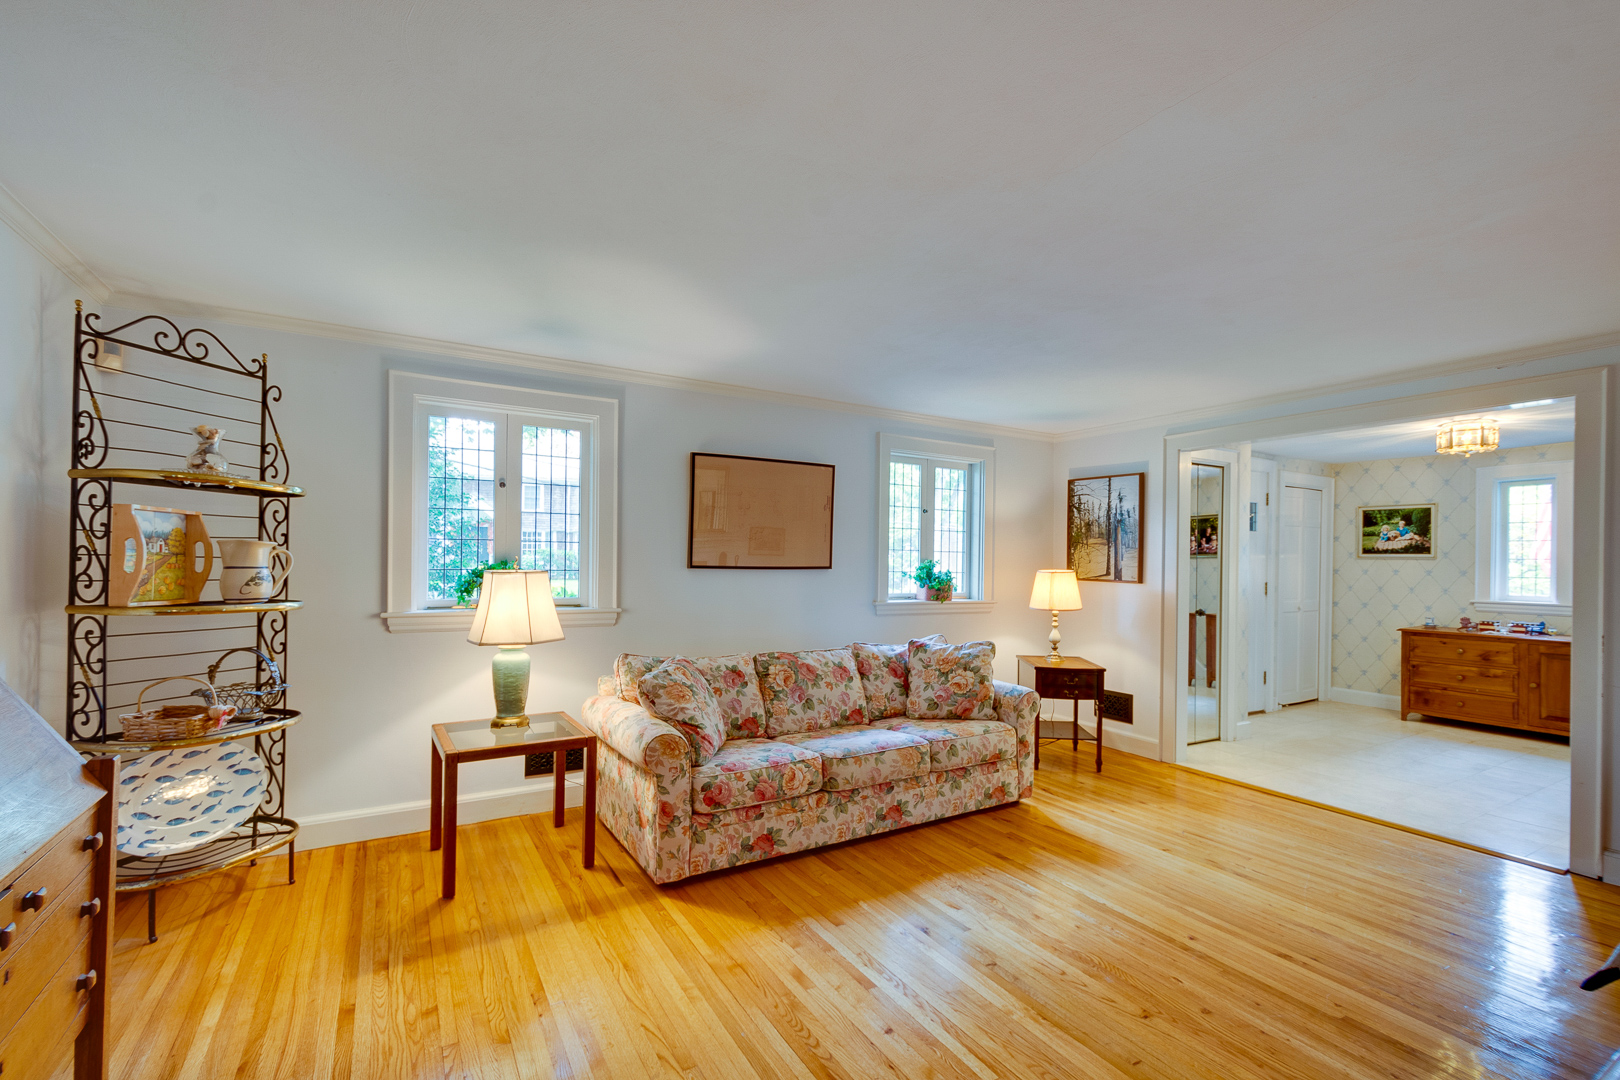 Thomas Adach - Wellesley MA professional real estate photographer - 508-655-2225